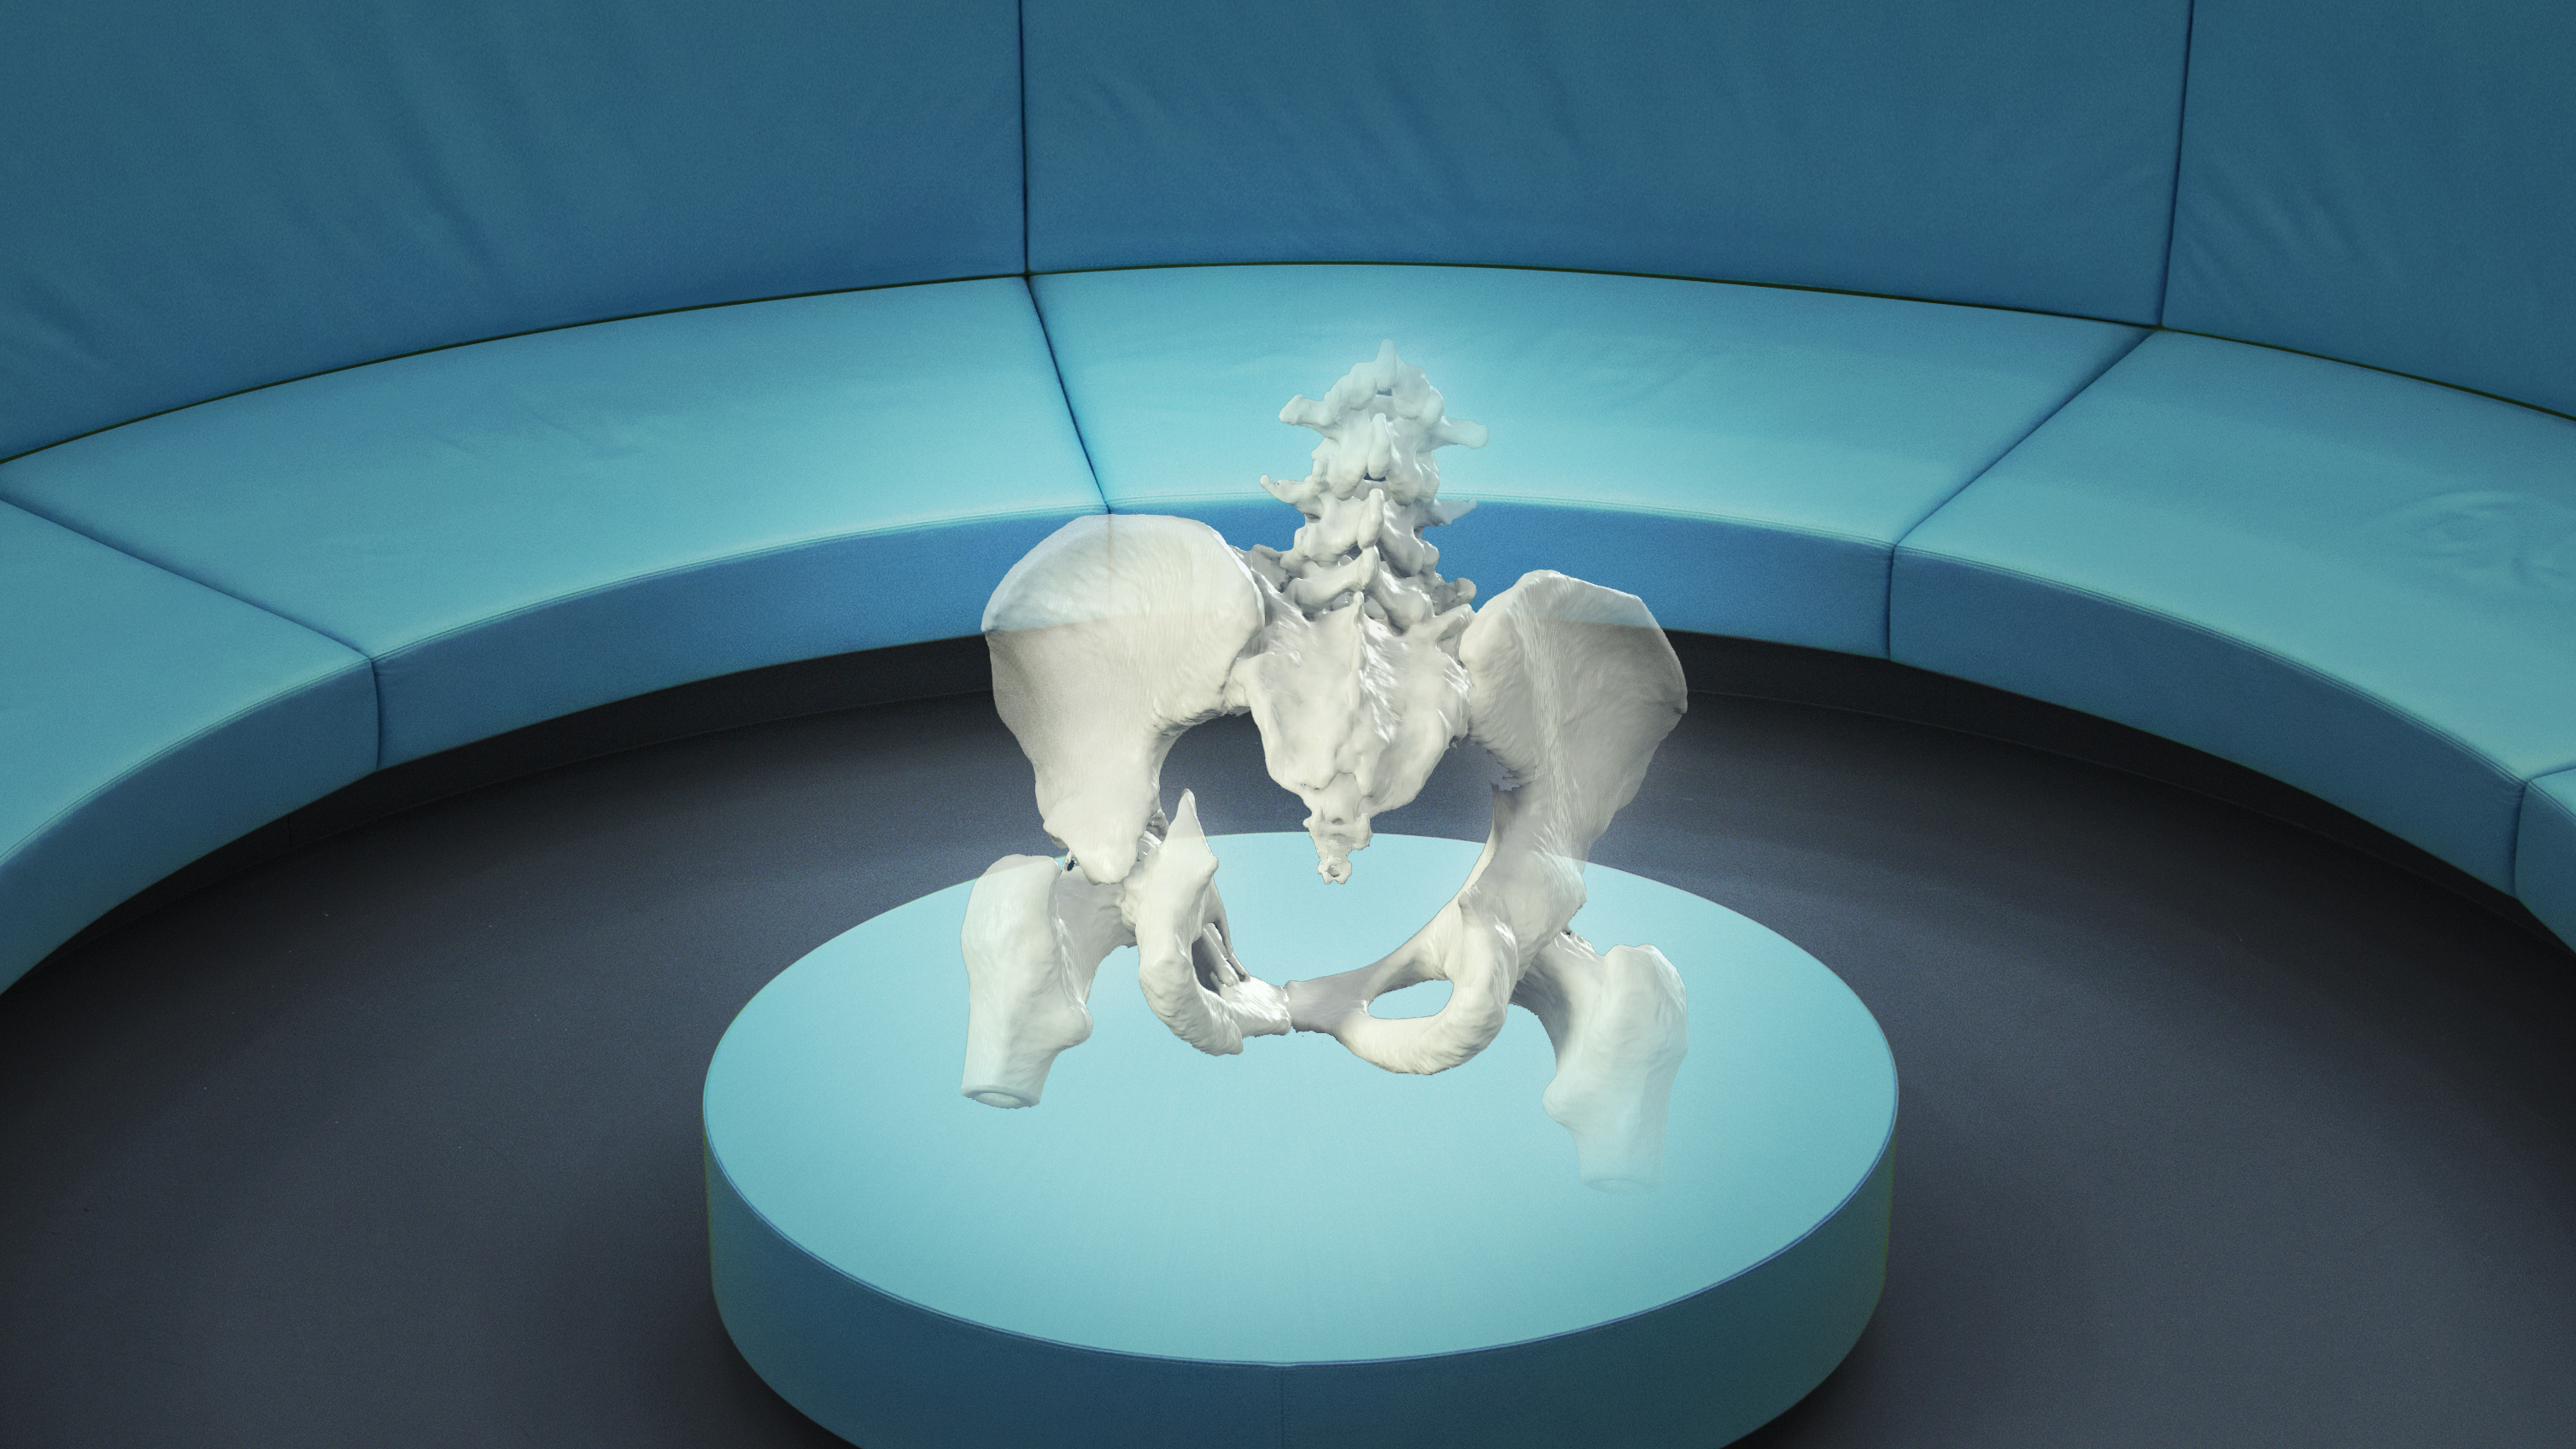 A mixed reality view of the bones of a human pelvis showing a fracture